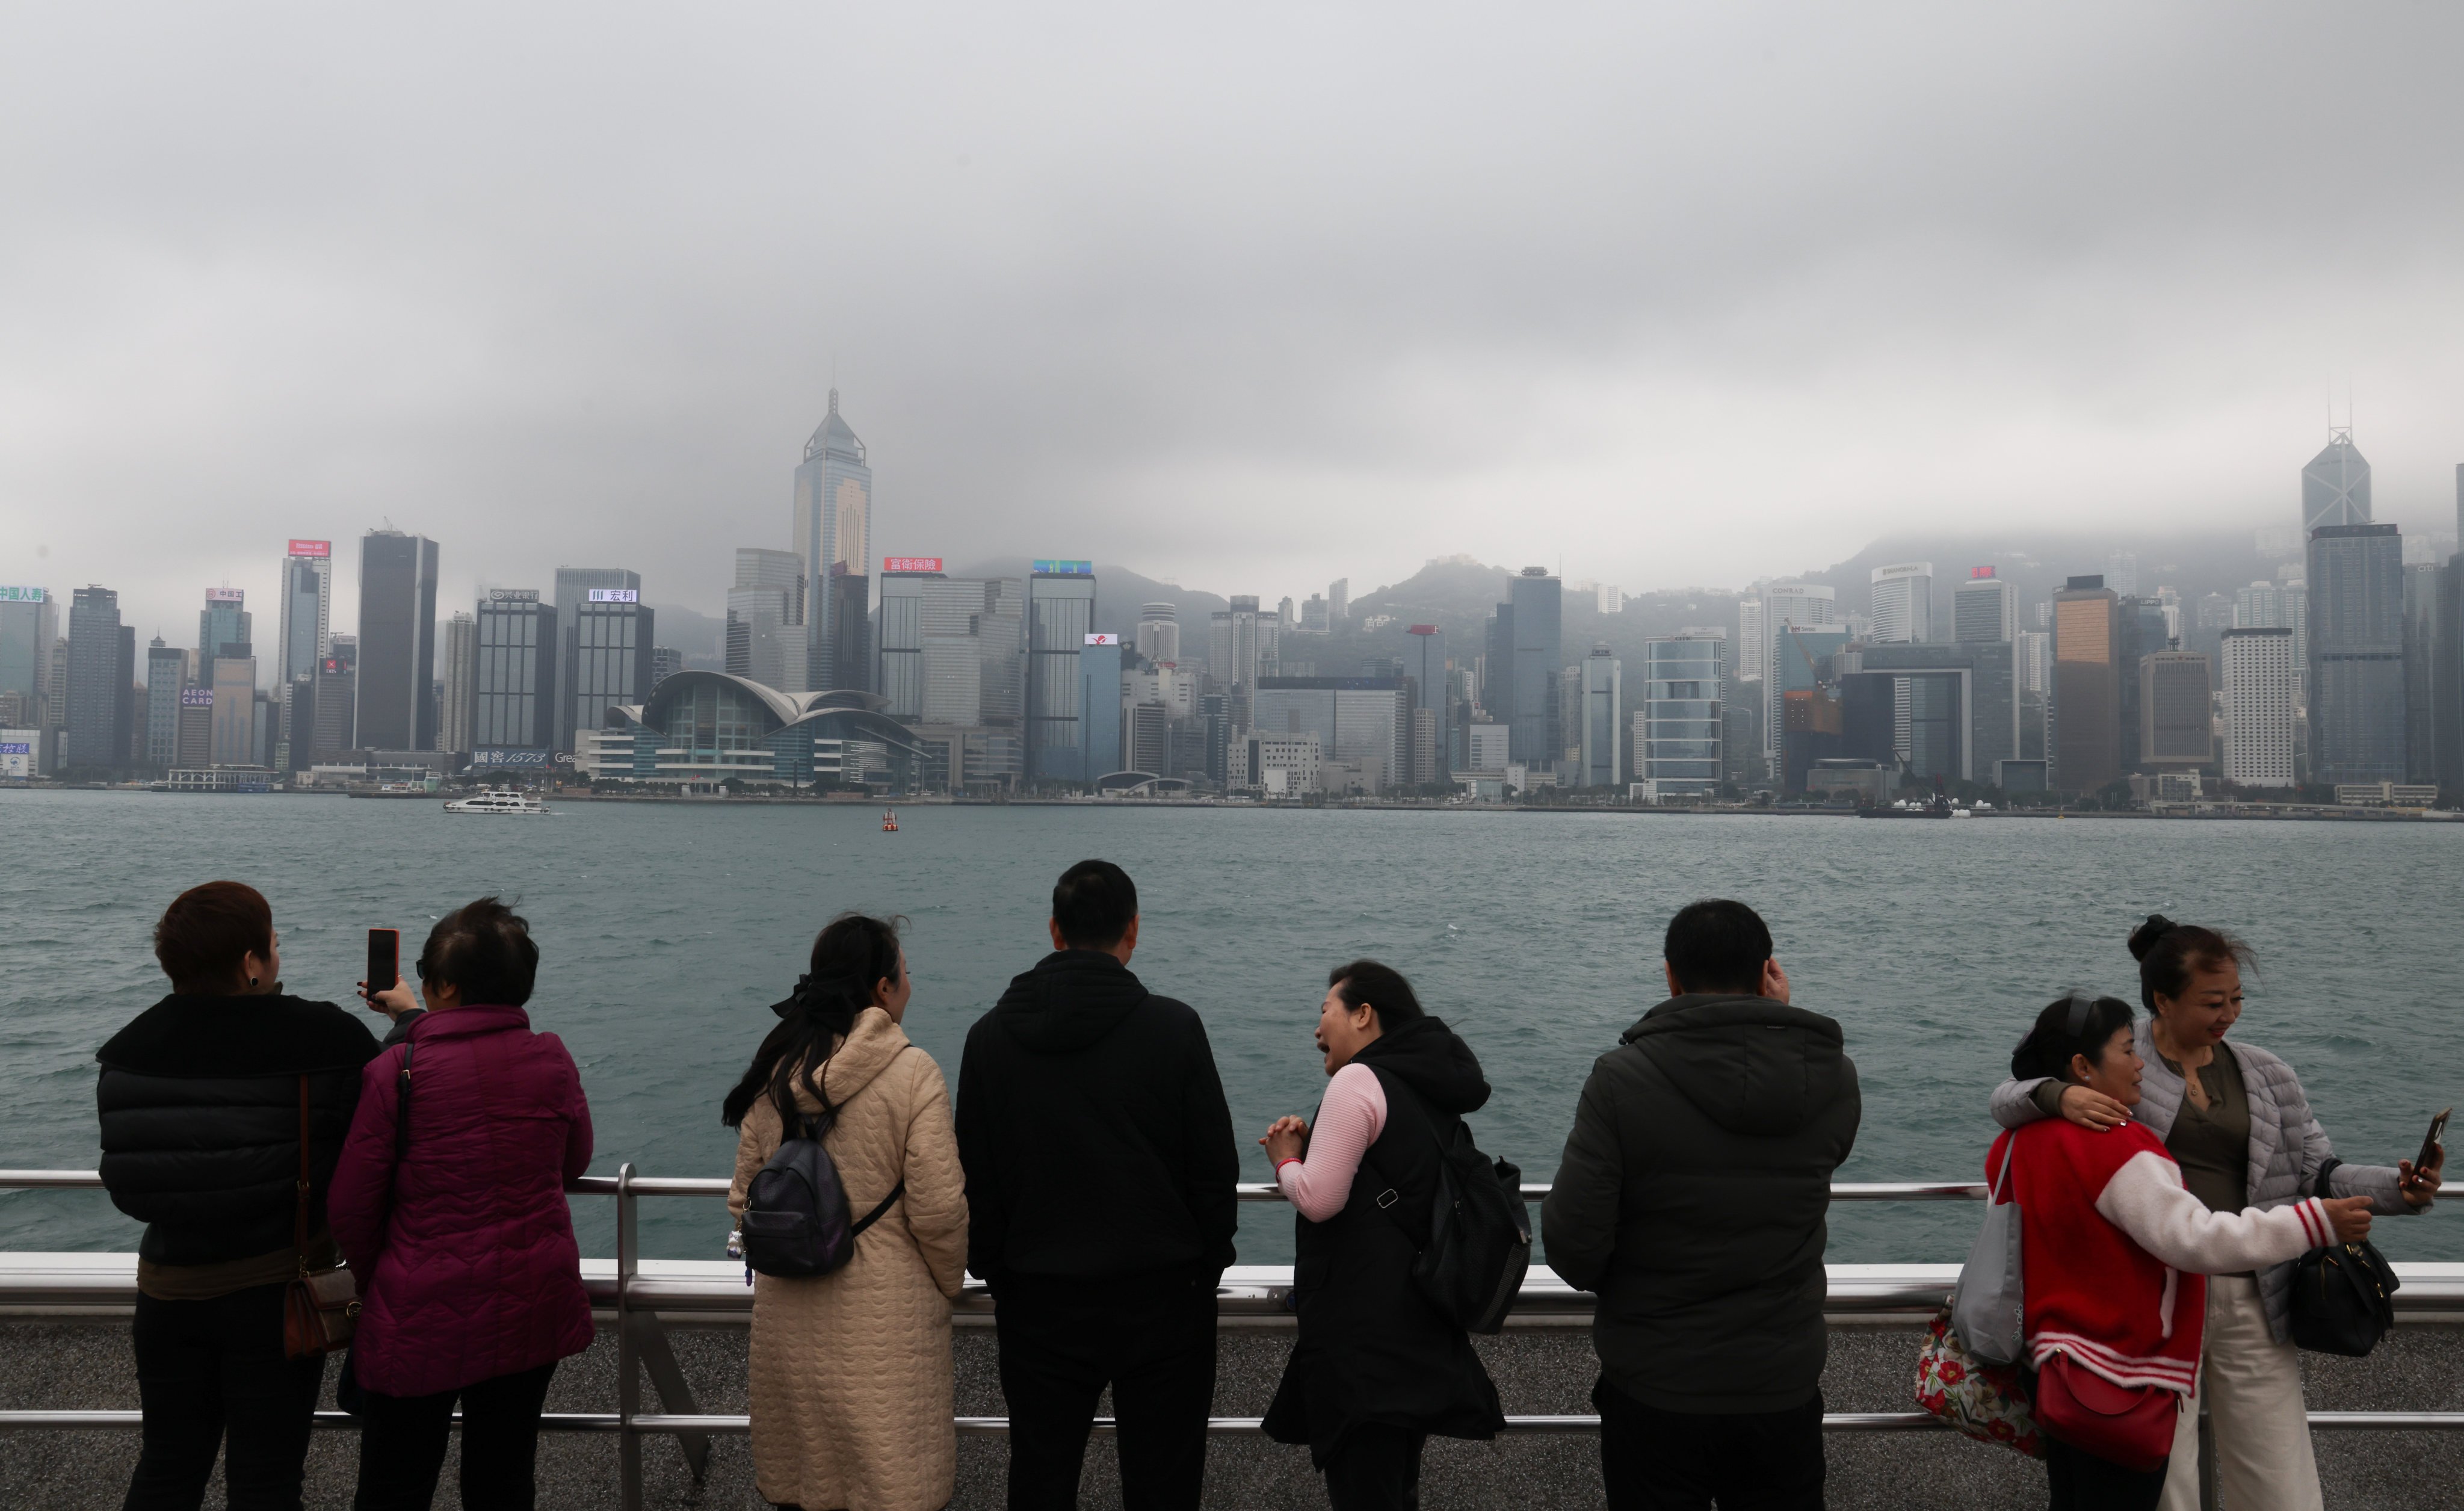 Hong Kong’s latest budget proposal includes plans to attract tourists to the city. Photo: Jelly Tse